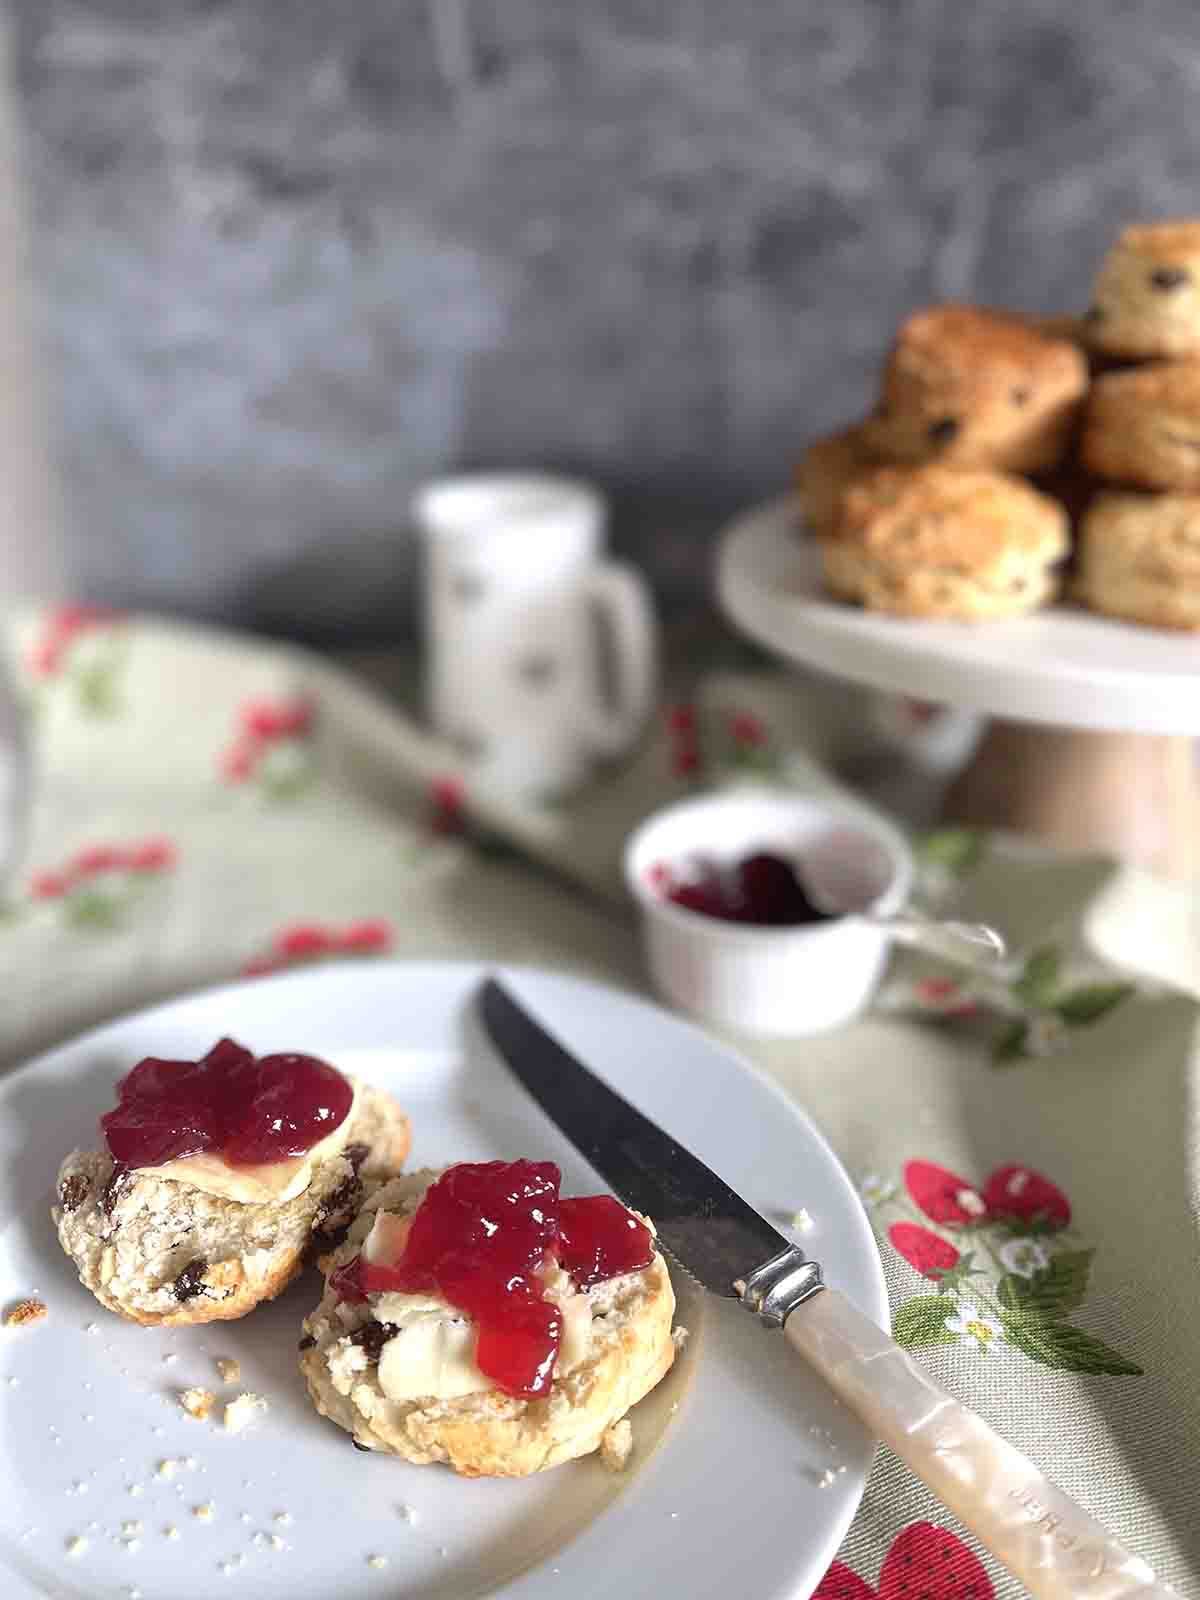 fruit scone with jam on a plate.